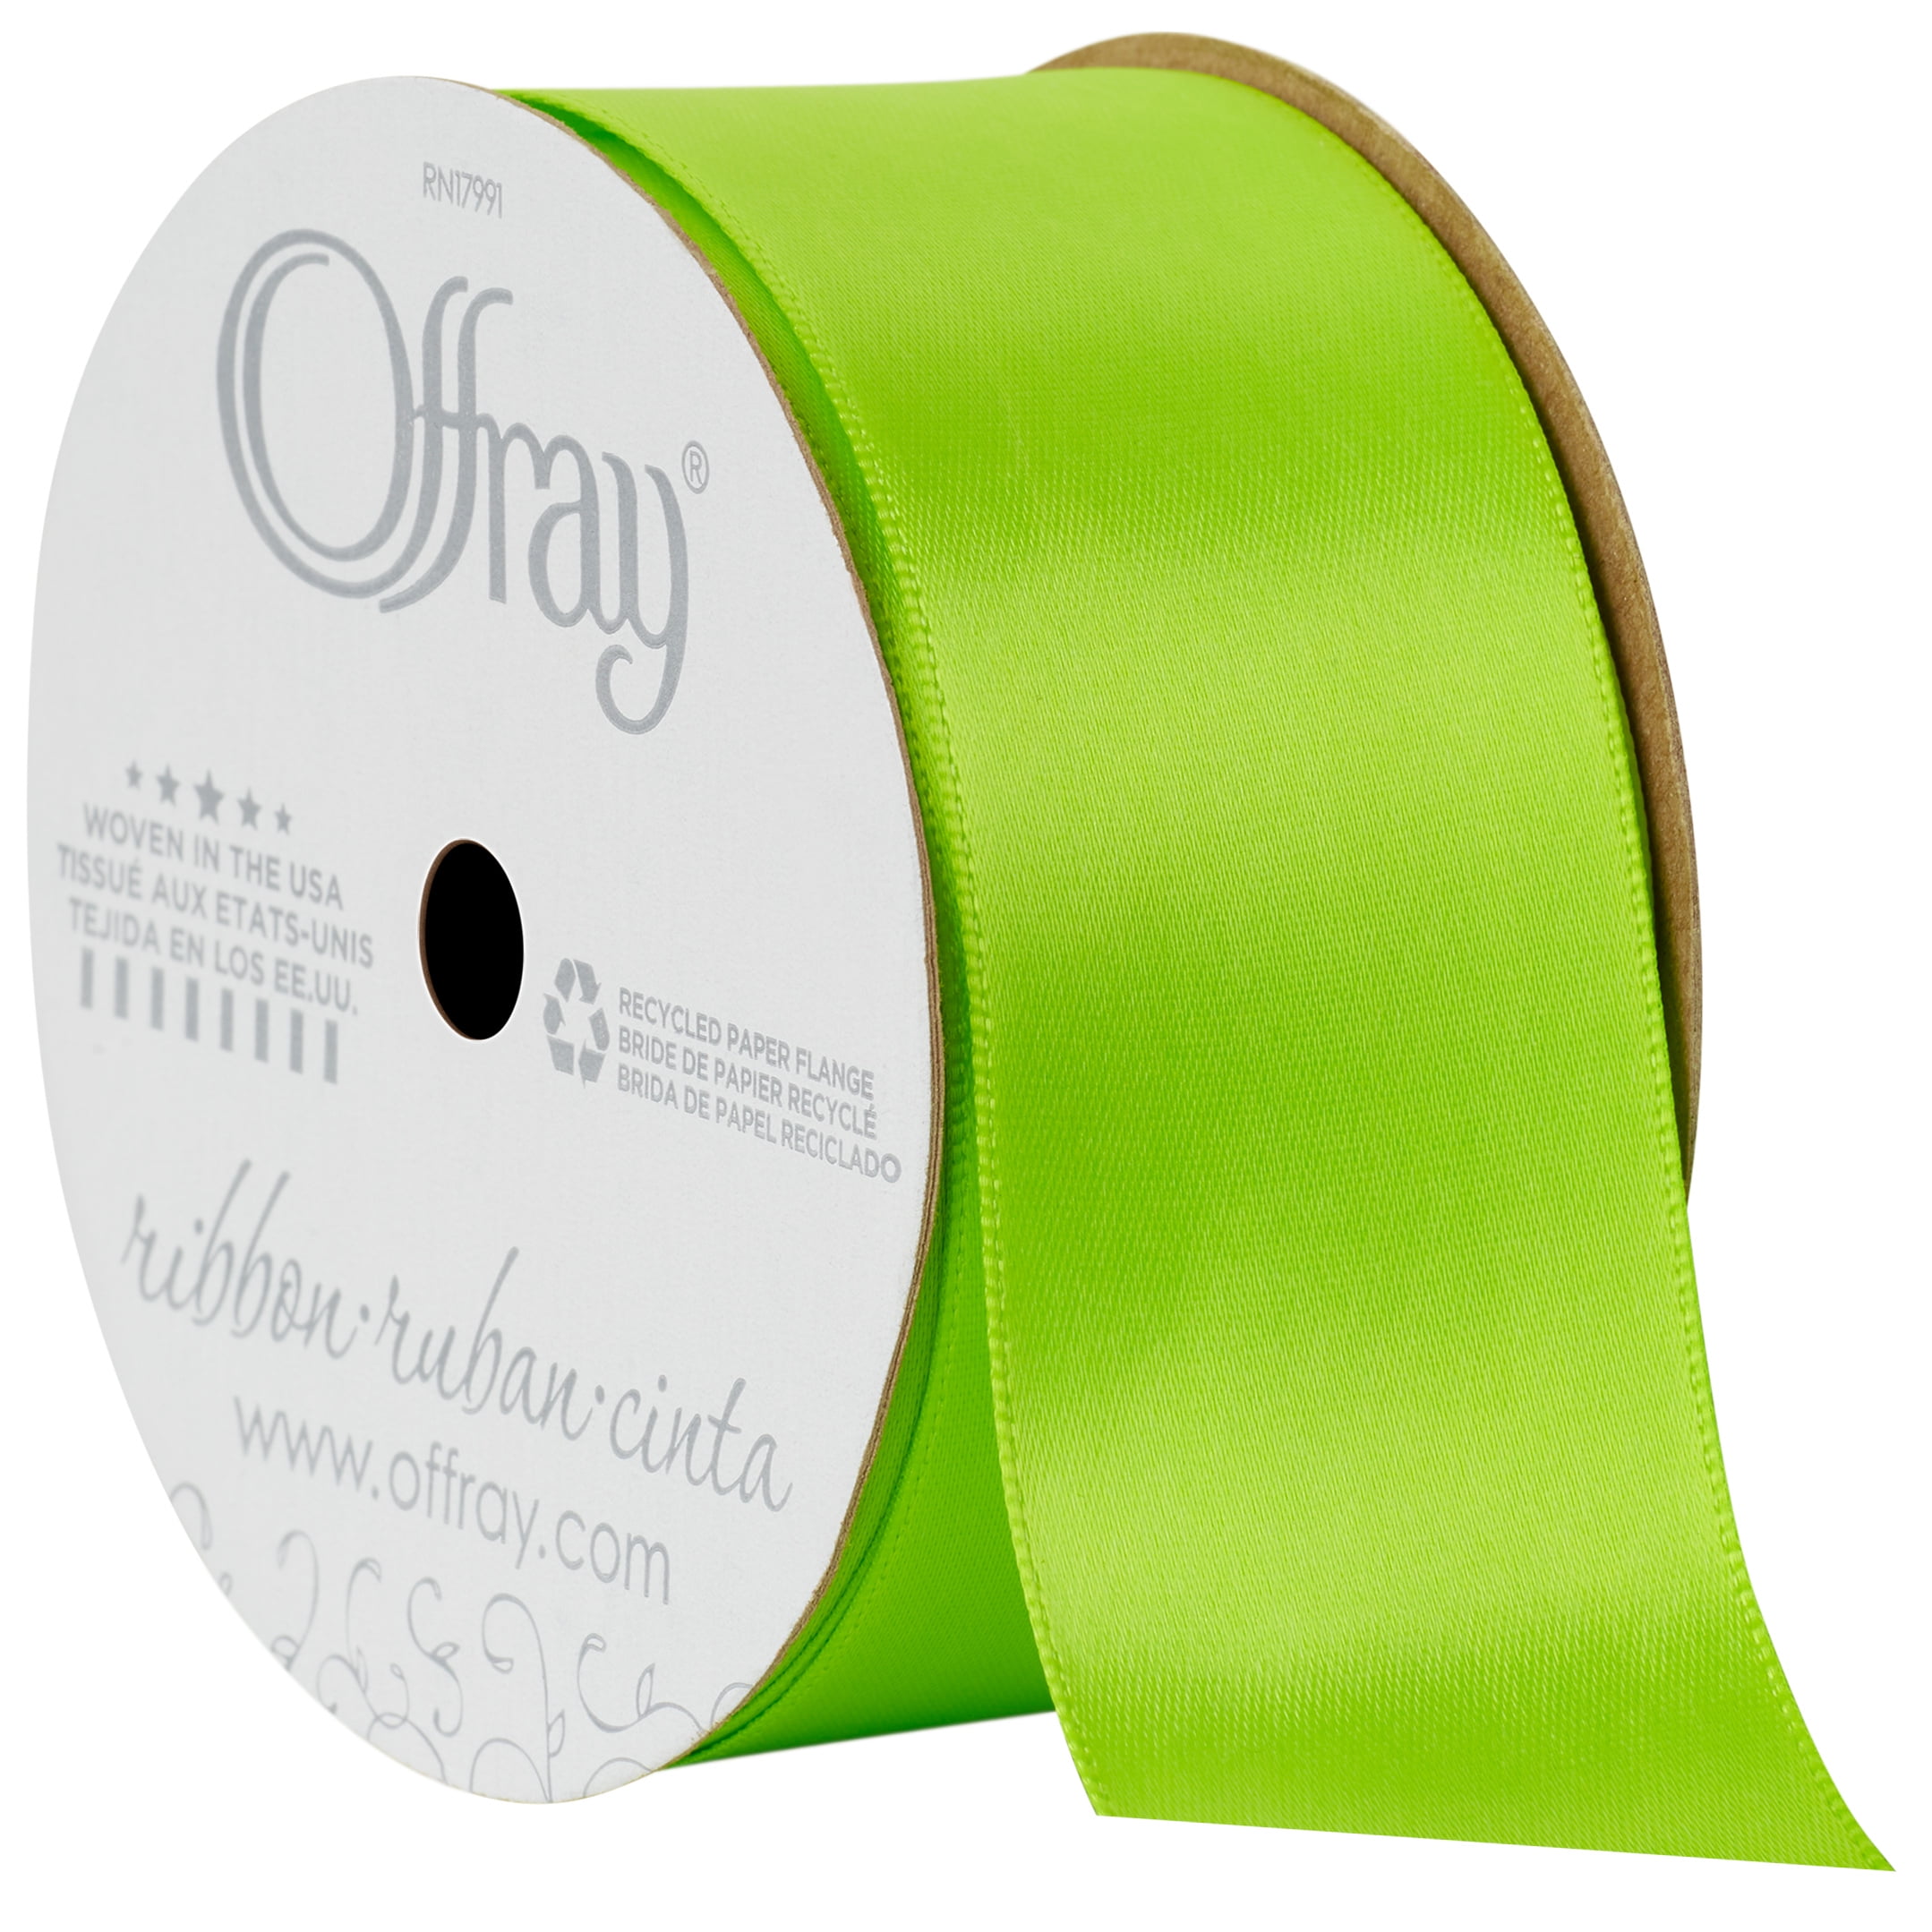 Offray Ribbon, Chartreuse Green 1 1/2 inch Double Face Satin Polyester Ribbon, 12 feet